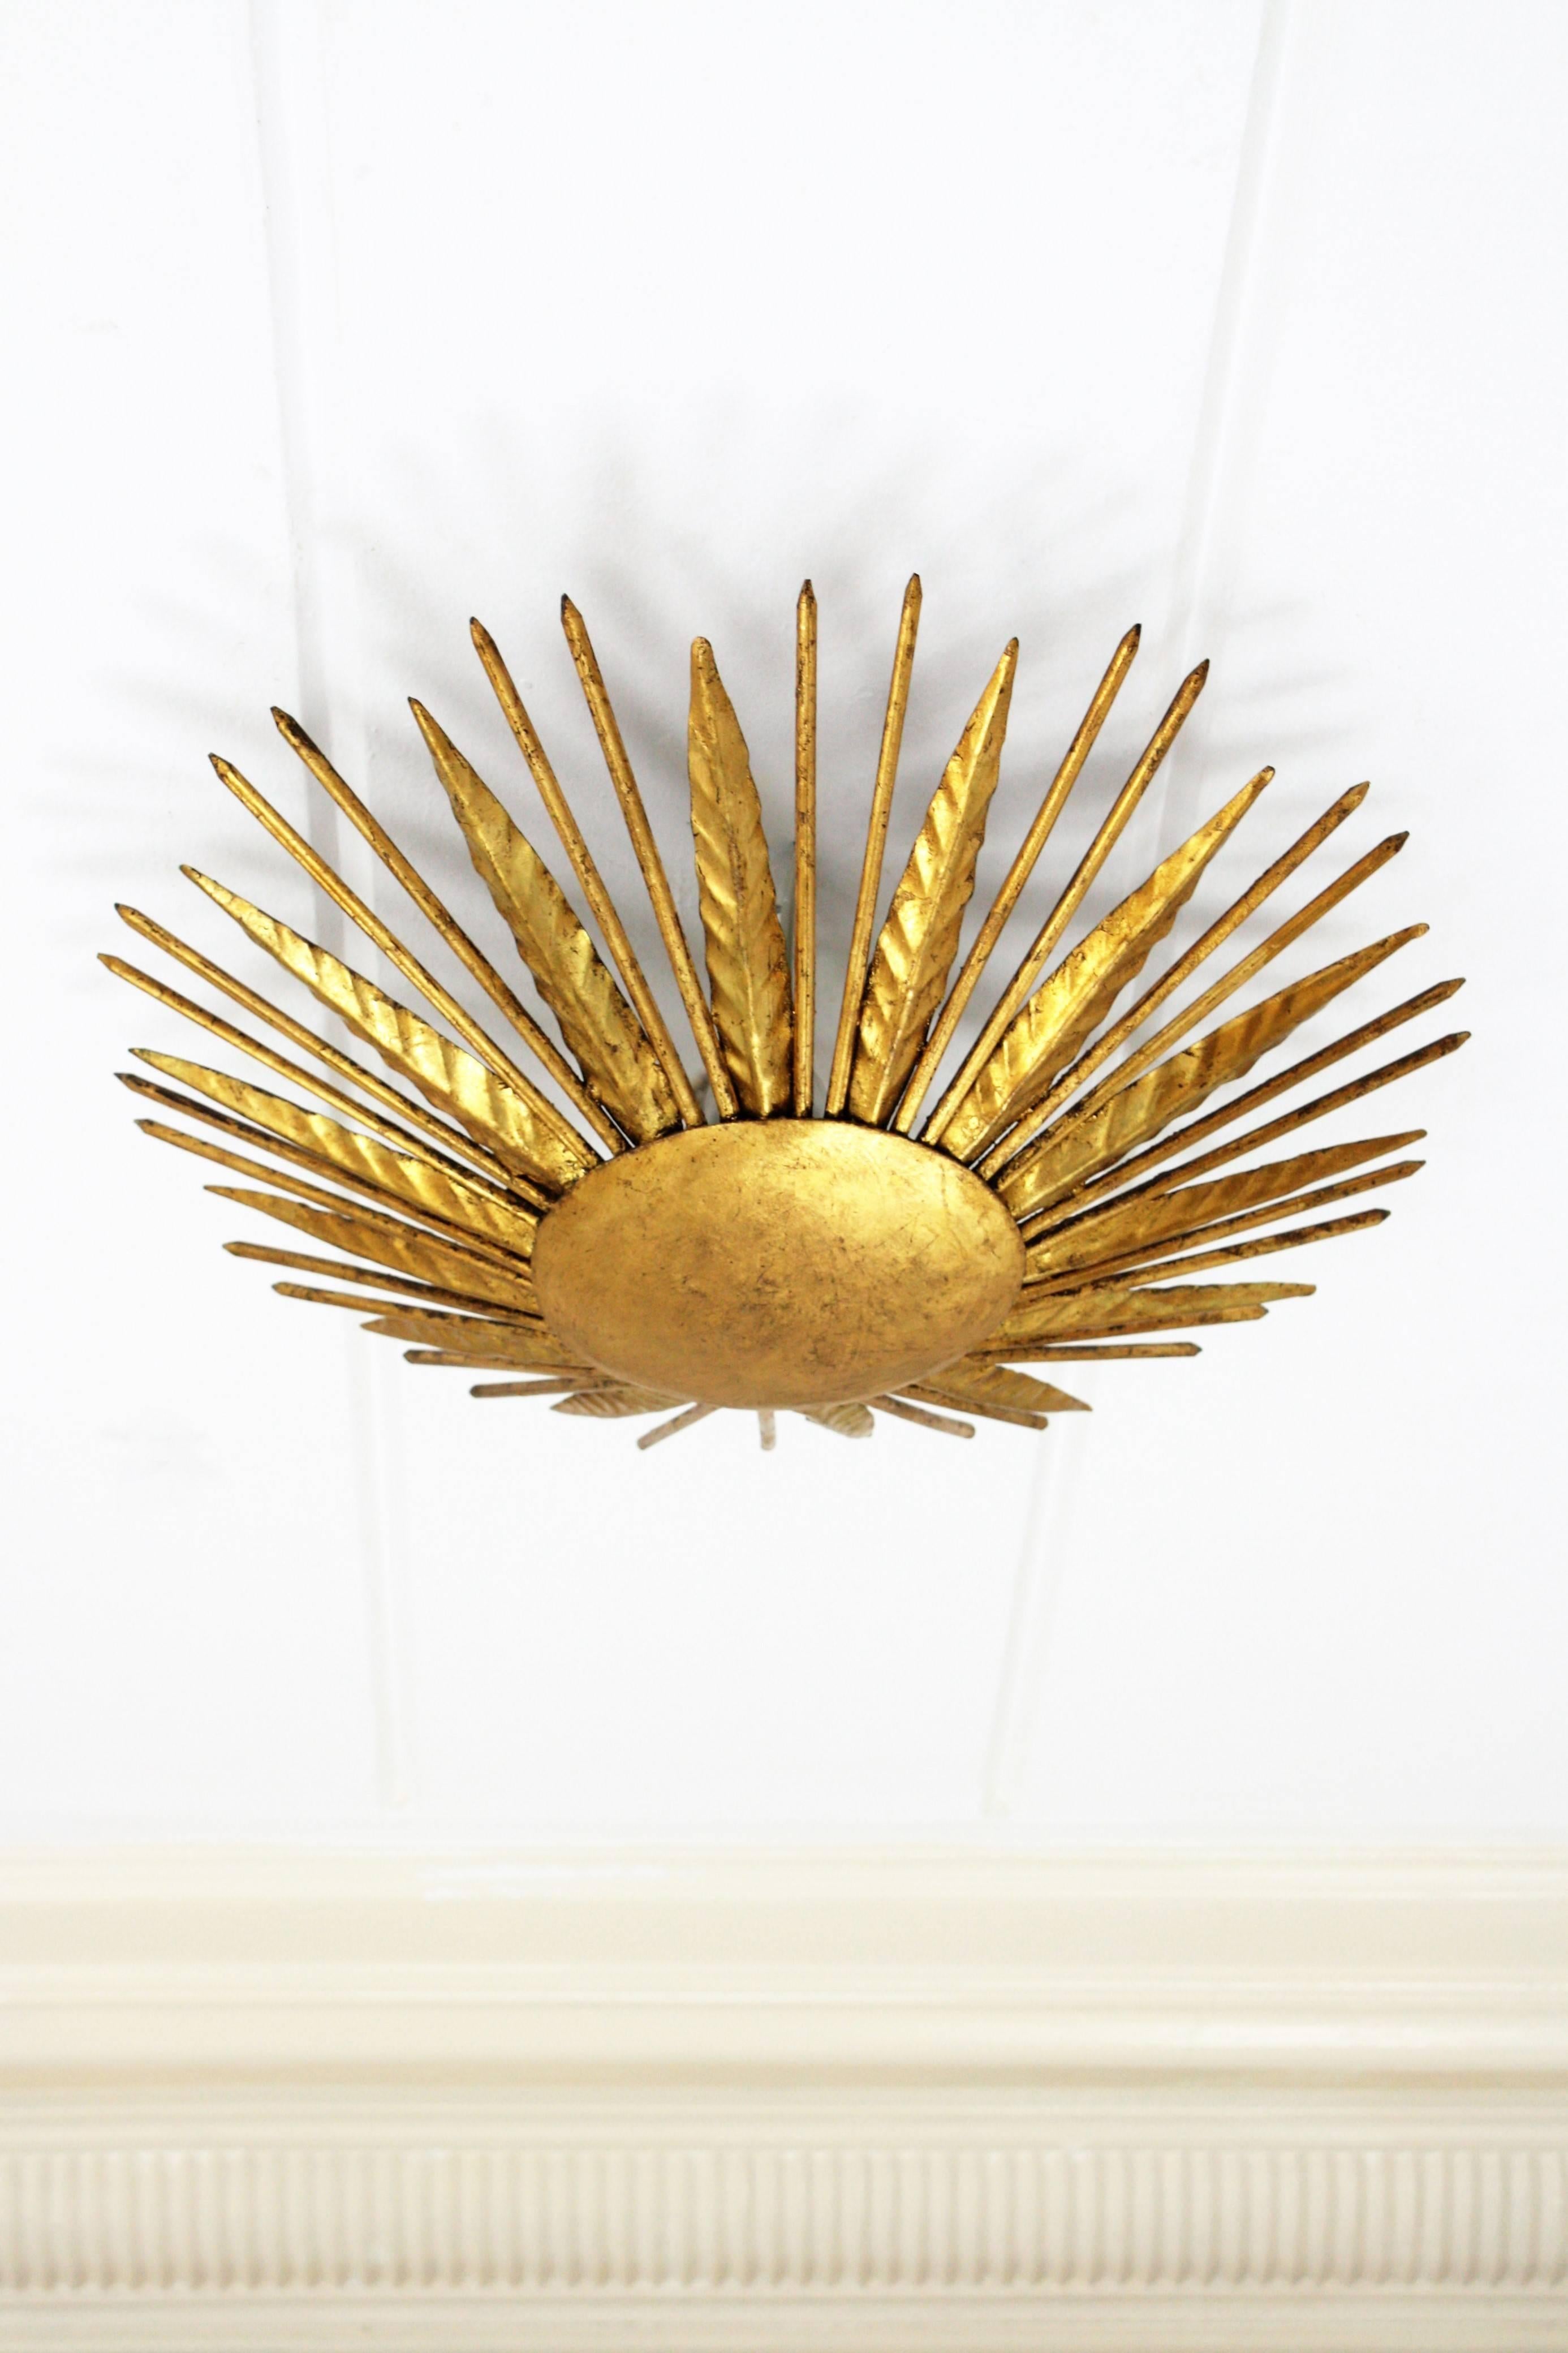 Hand-hammered gold leaf gilt iron sunburst light fixture from the late Art Deco period, France, 1940s.
This piece is highly decorative due to its design, alternating iron leaves with pointed spikes. This light fixture can be hung as a wall or